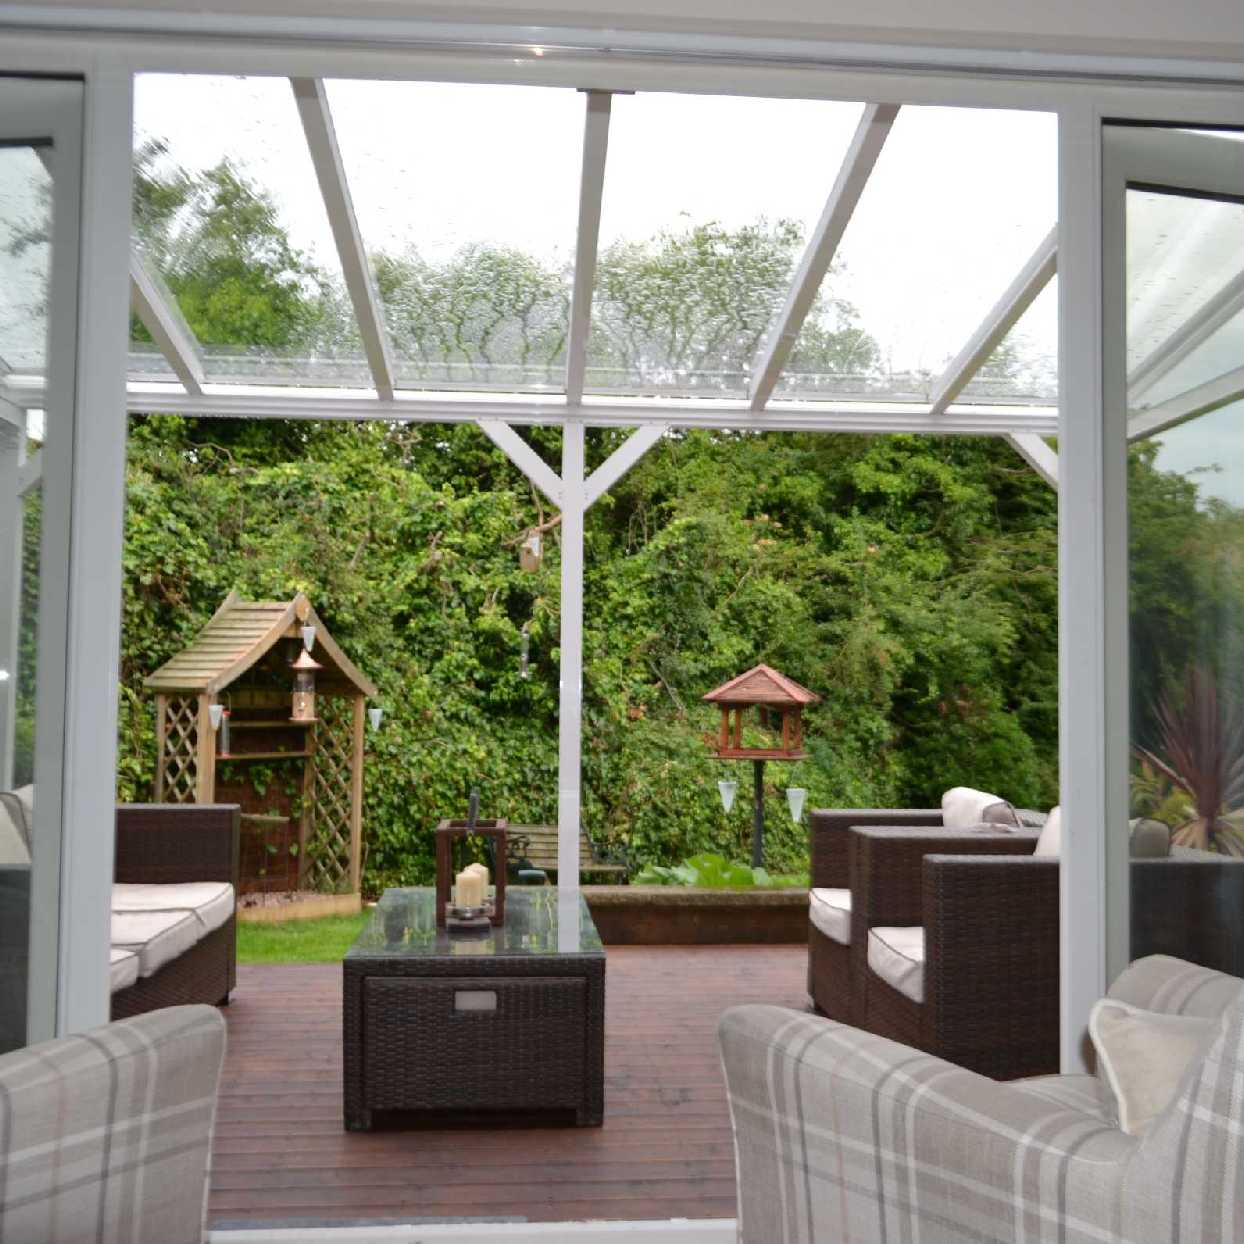 Great selection of Omega Smart Lean-To Canopy, White UNGLAZED for 6mm Glazing - 2.8m (W) x 1.5m (P), (2) Supporting Posts